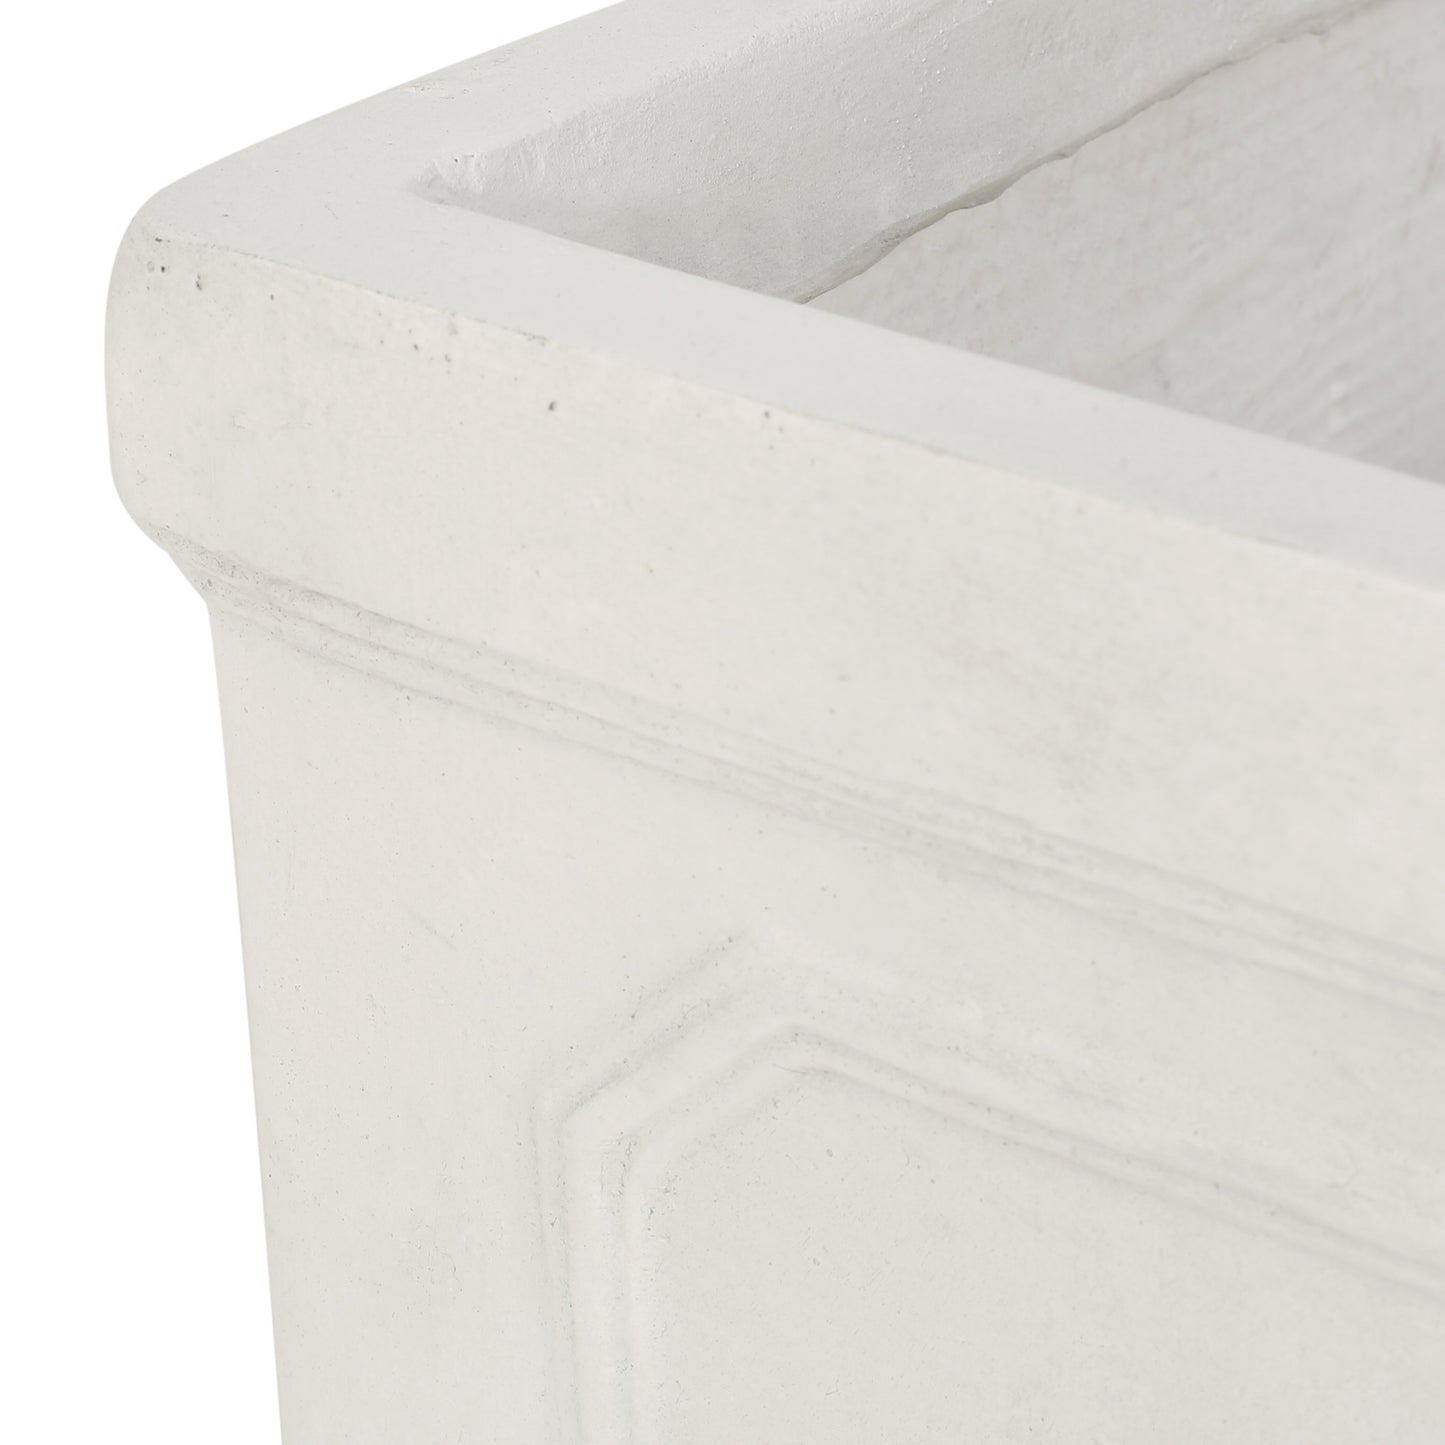 Greg Outdoor Small and Large Cast Stone Planter Set, Antique White